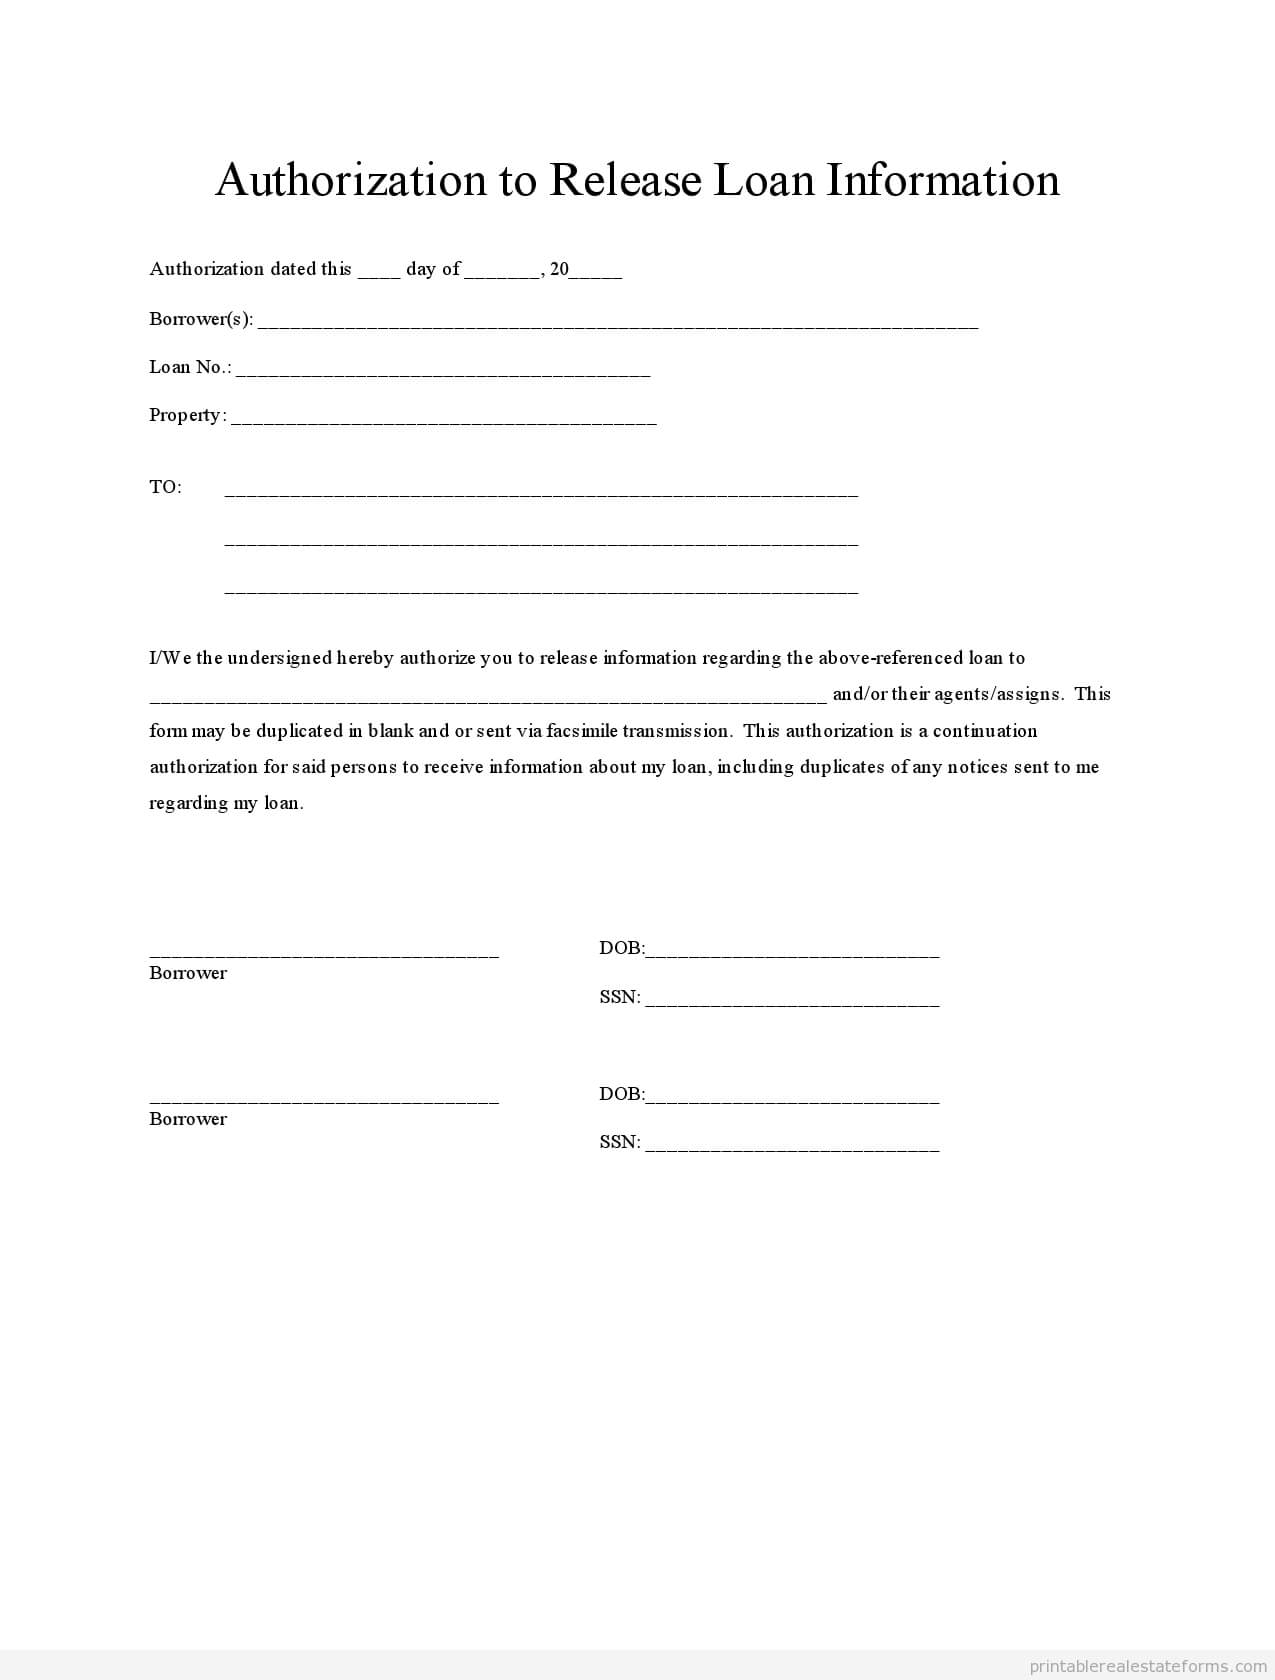 Printable Loan Authorization 2 Template 2015 | Real Estate Within Blank Legal Document Template